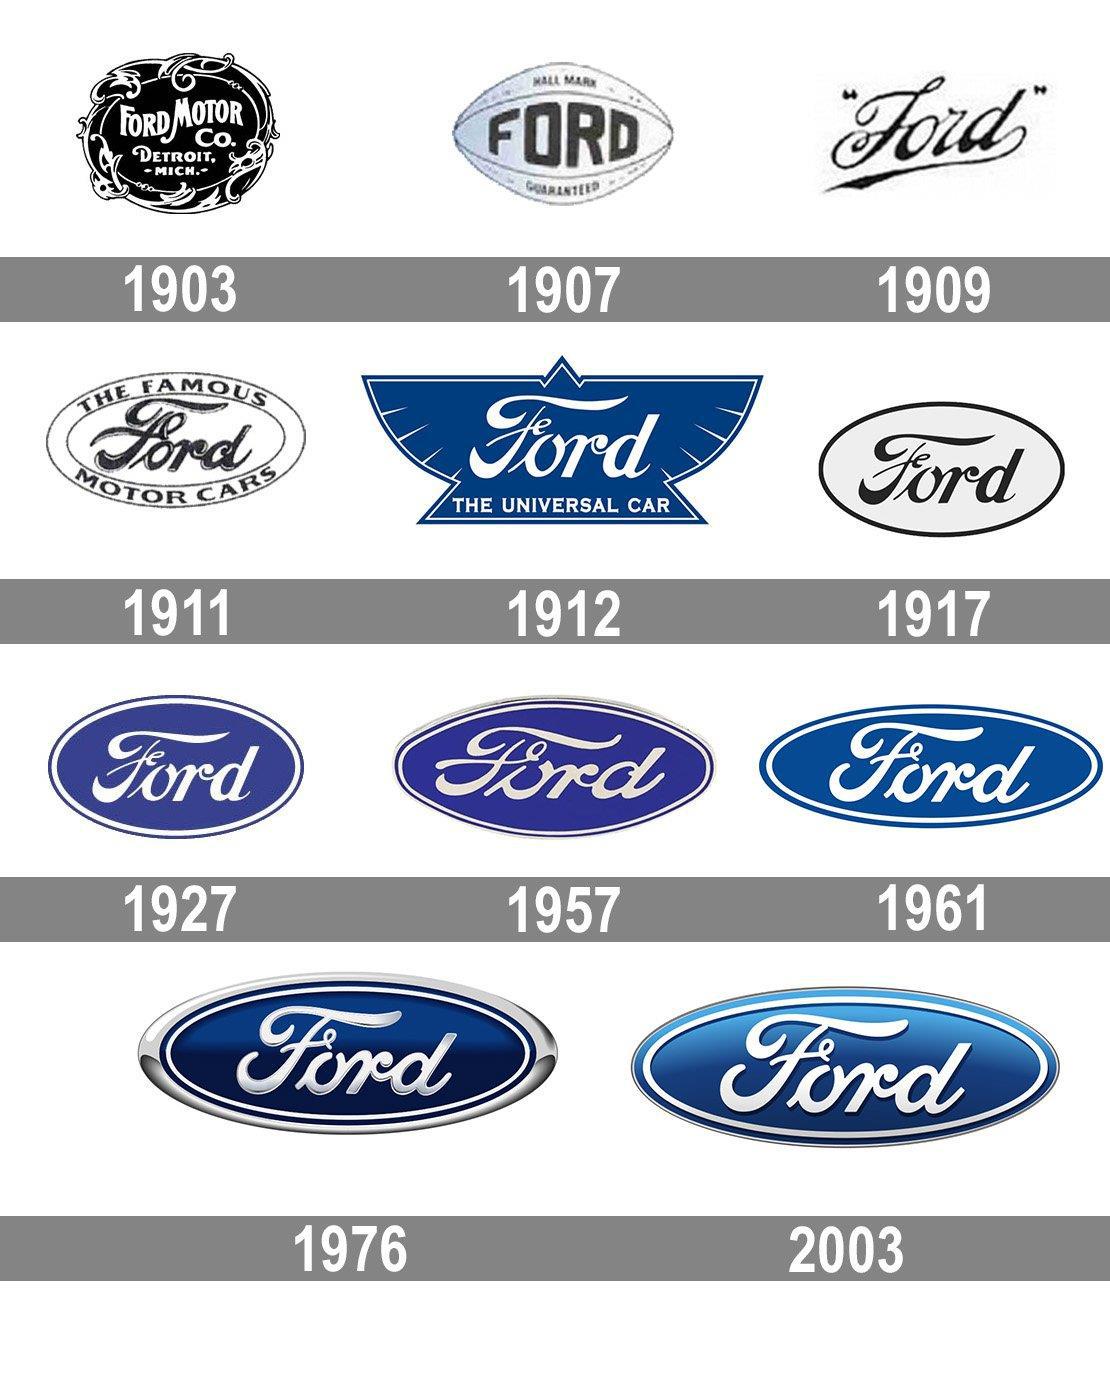 word-image-41329-21 20 Logos That Have Withstood The Test Of Time